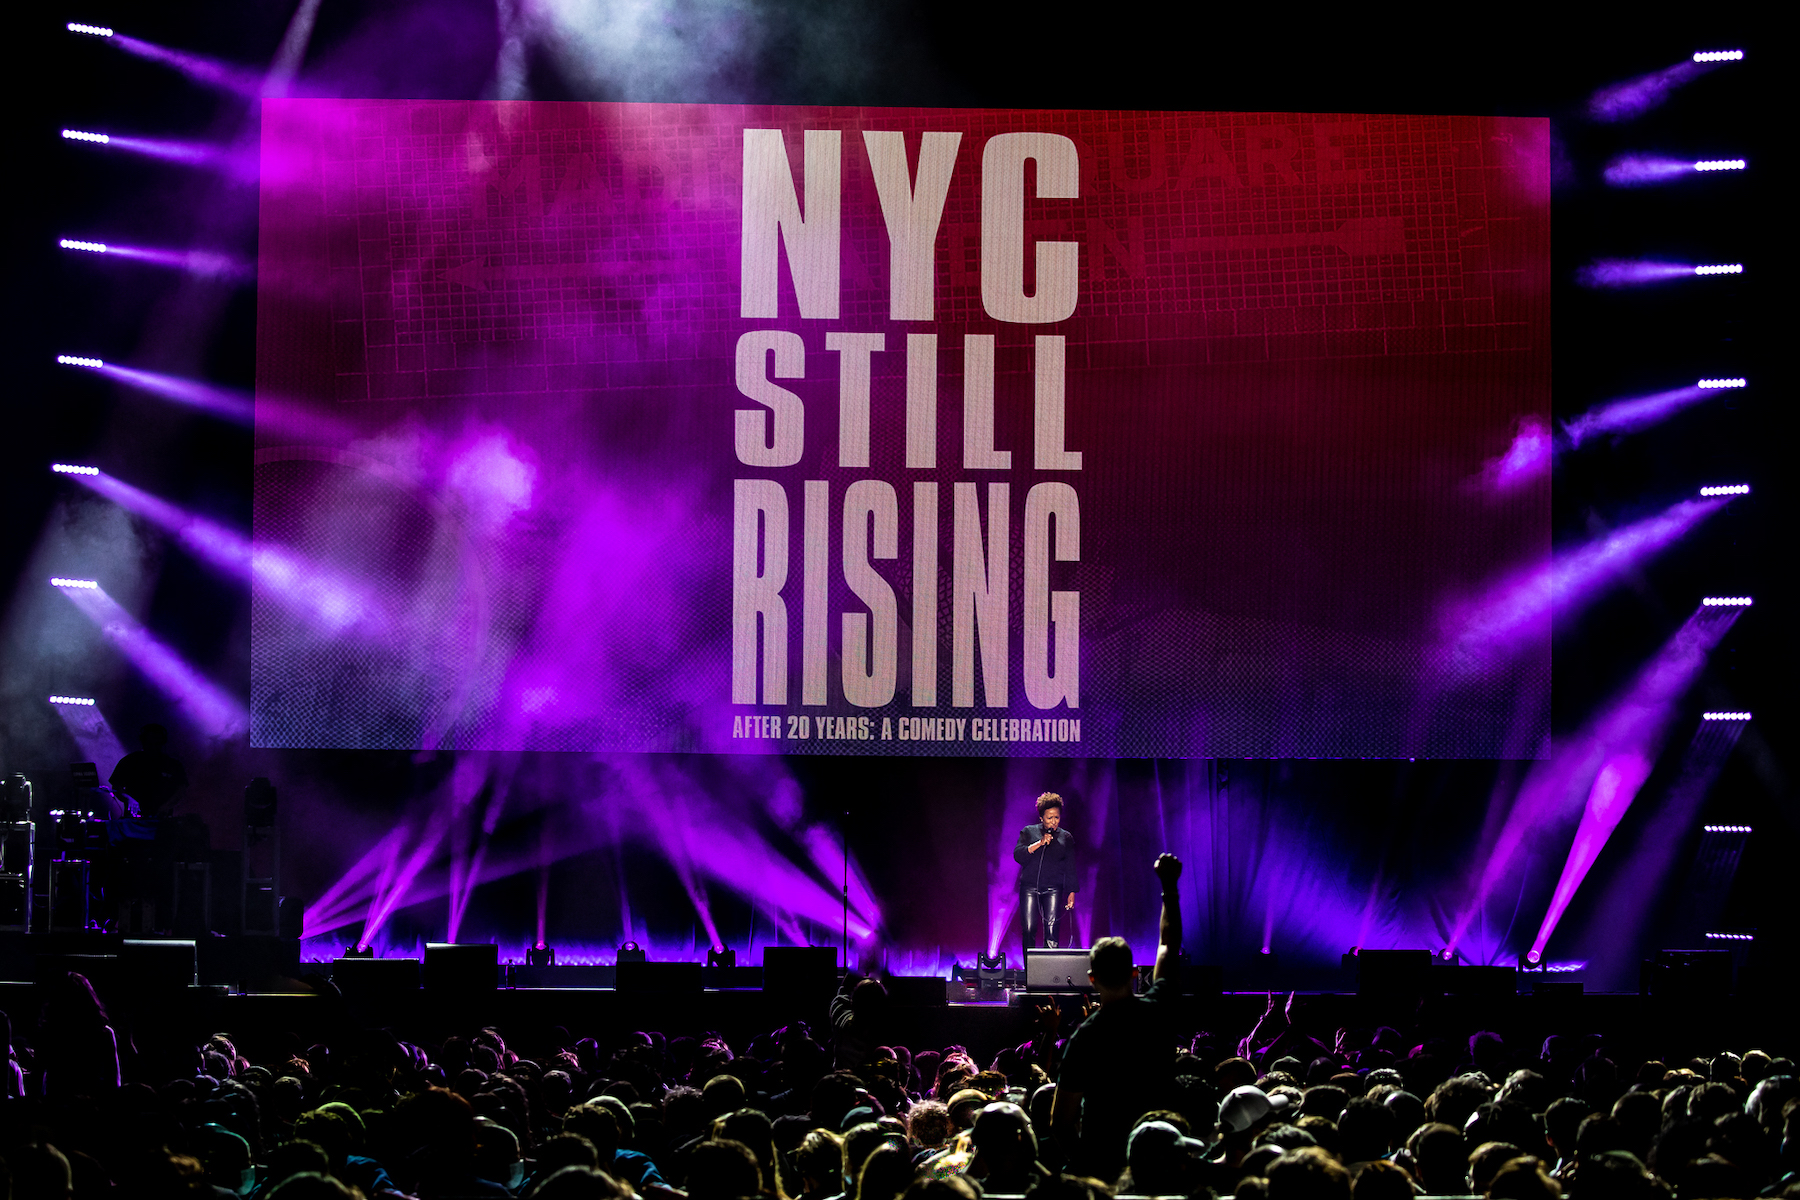 Photo 1 in 'NYC STILL RISING After 20 years:  A Comedy Celebration' gallery showcasing lighting design by Mike Baldassari of Mike-O-Matic Industries LLC